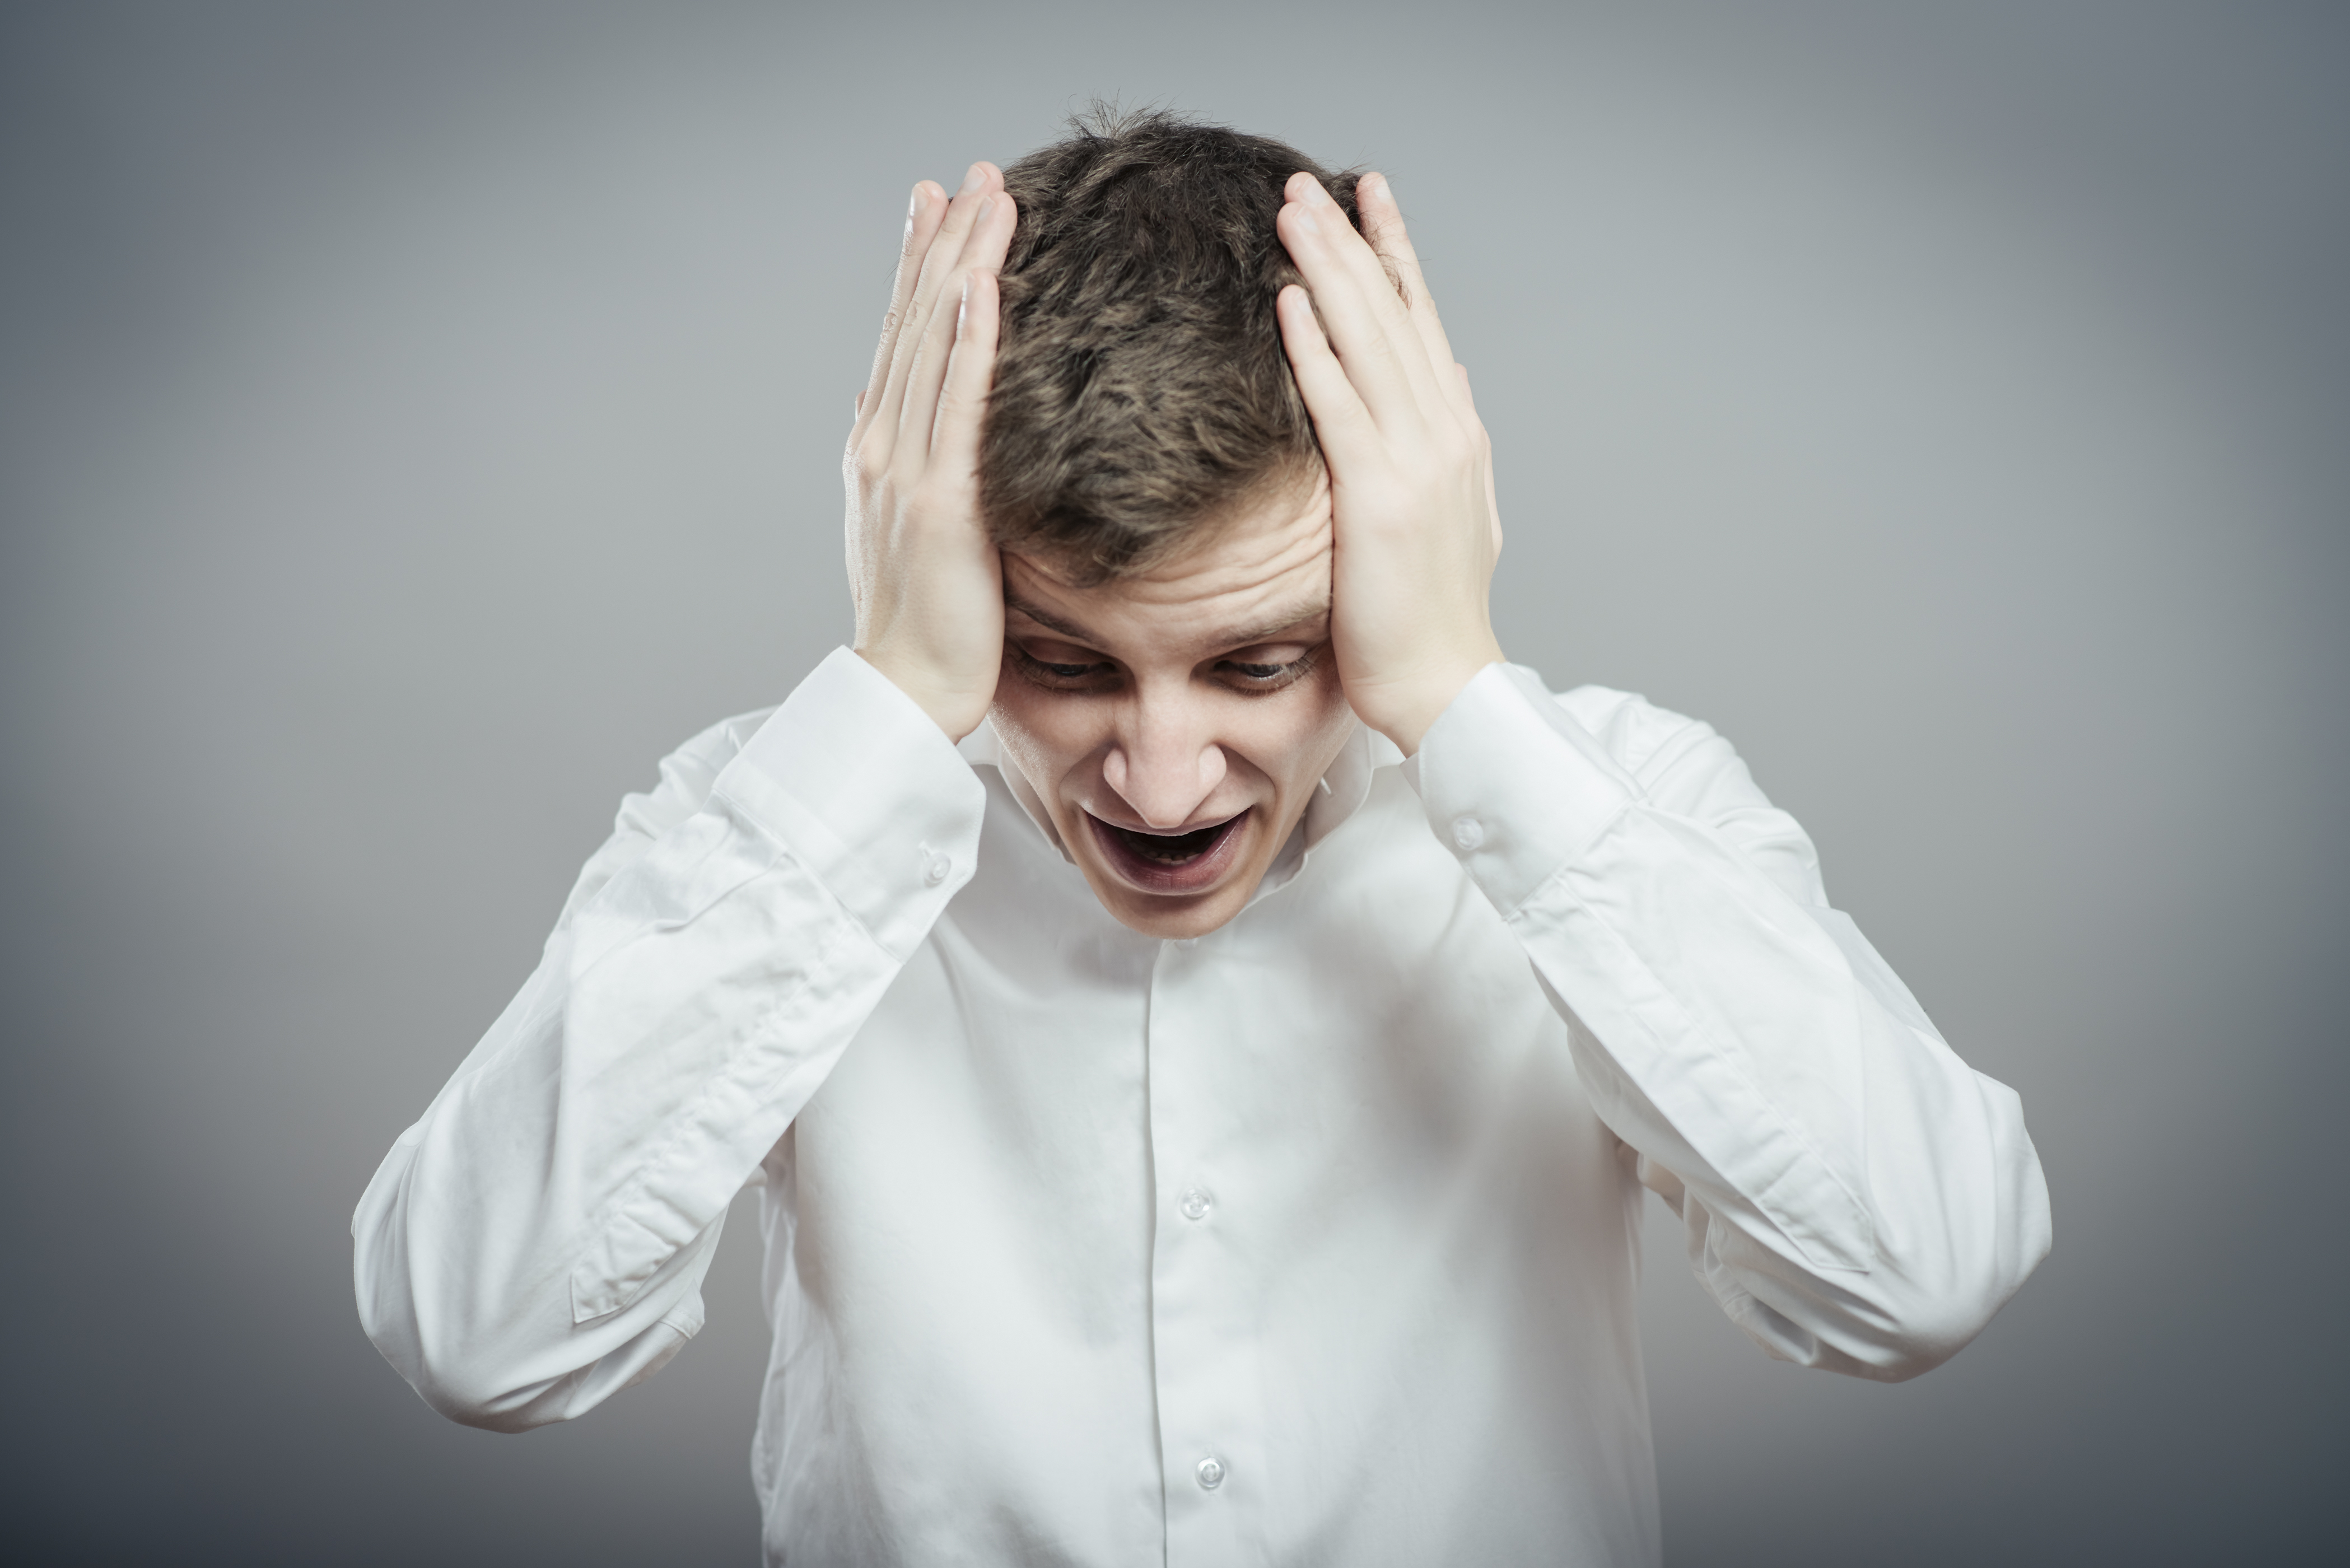 Frustrated man with his hands on his head | Source: Shutterstock